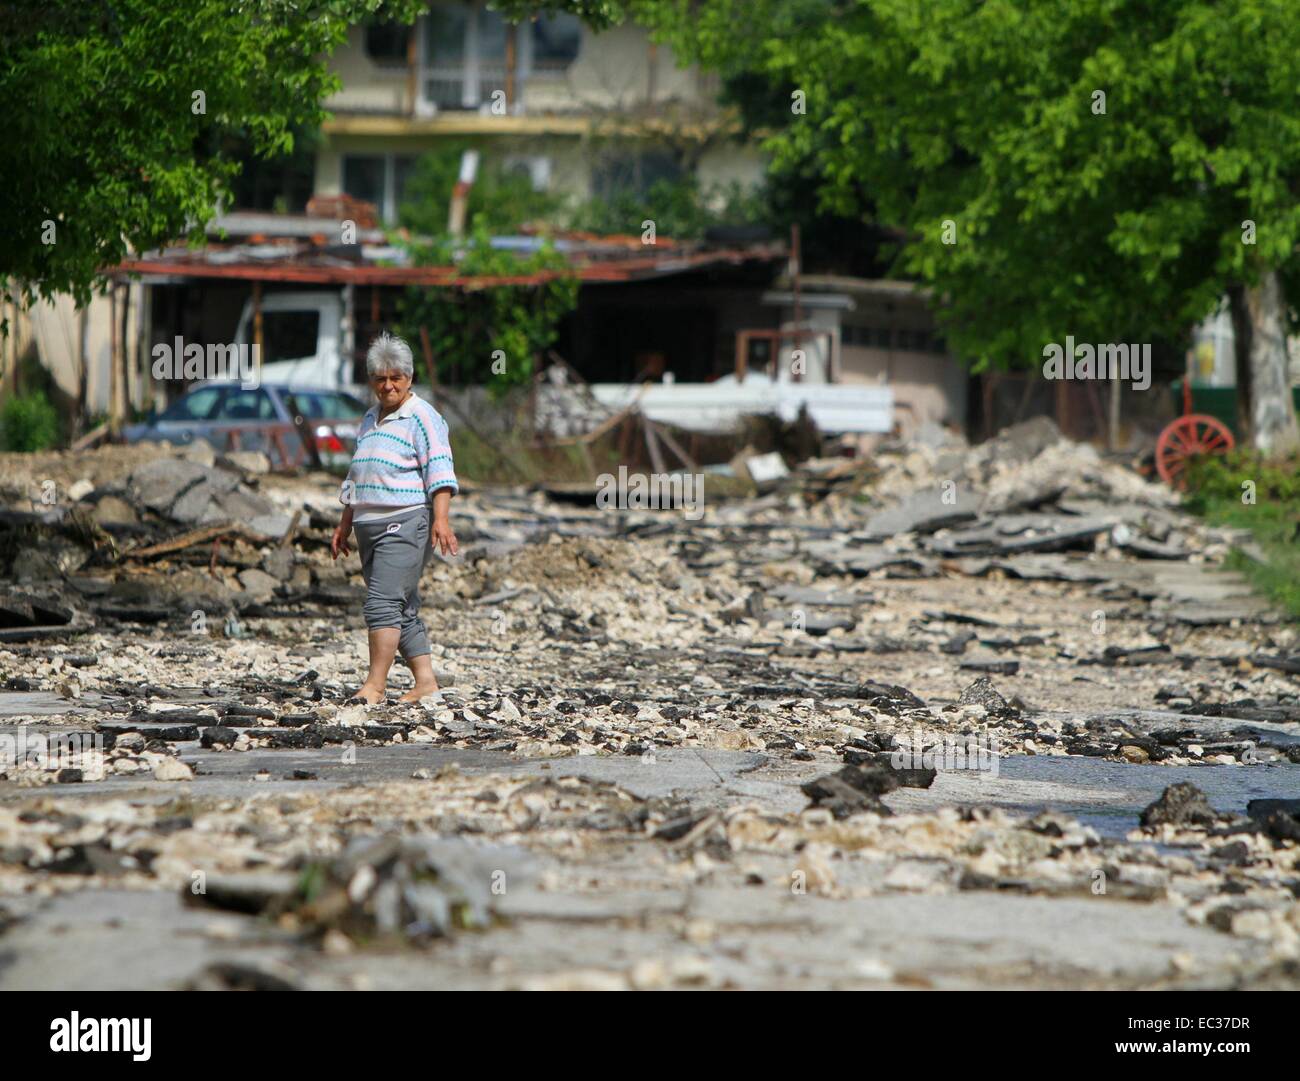 Torrential rain throughout Bulgaria has caused severe flooding, destroying thousands of homes and cars. Doliste is one of the worst hit villages, where a small river overflowed during the night sending a three-foot wave crashing through the streets. About Stock Photo